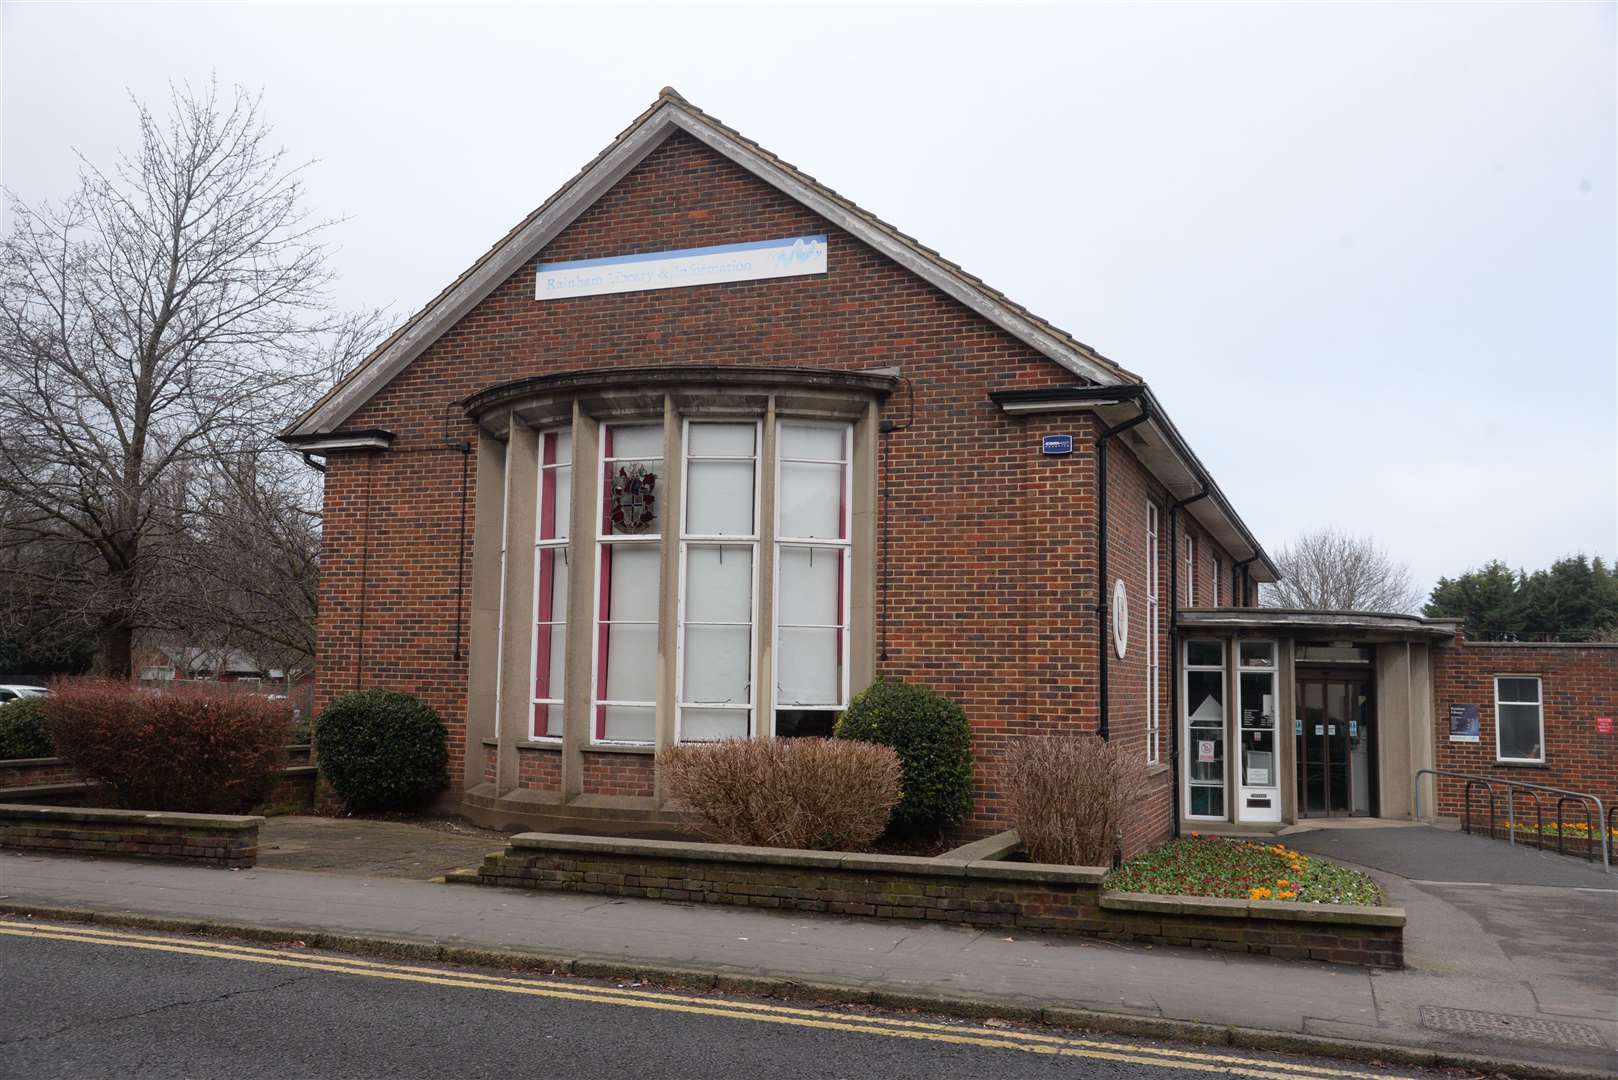 Rainham Library is just outside the main town centre